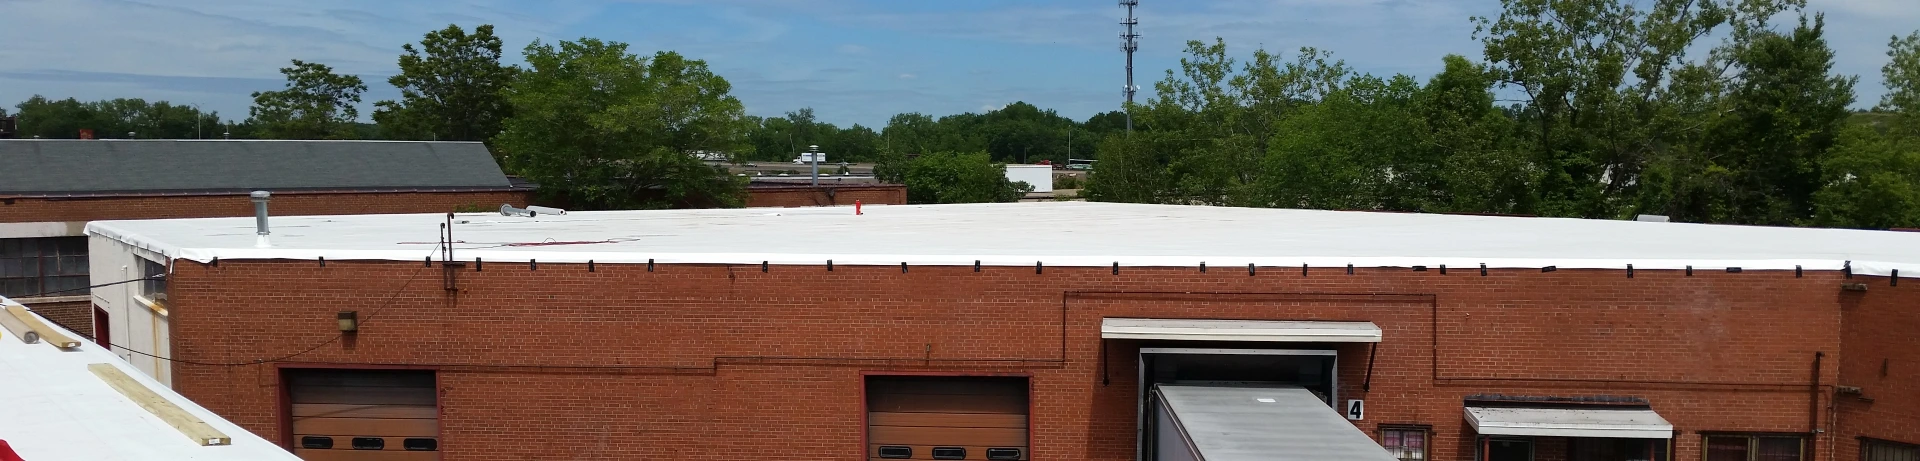 A commercial warehouse with a new reflective coating installed by Vanguard Roofing in Hartford, CT.